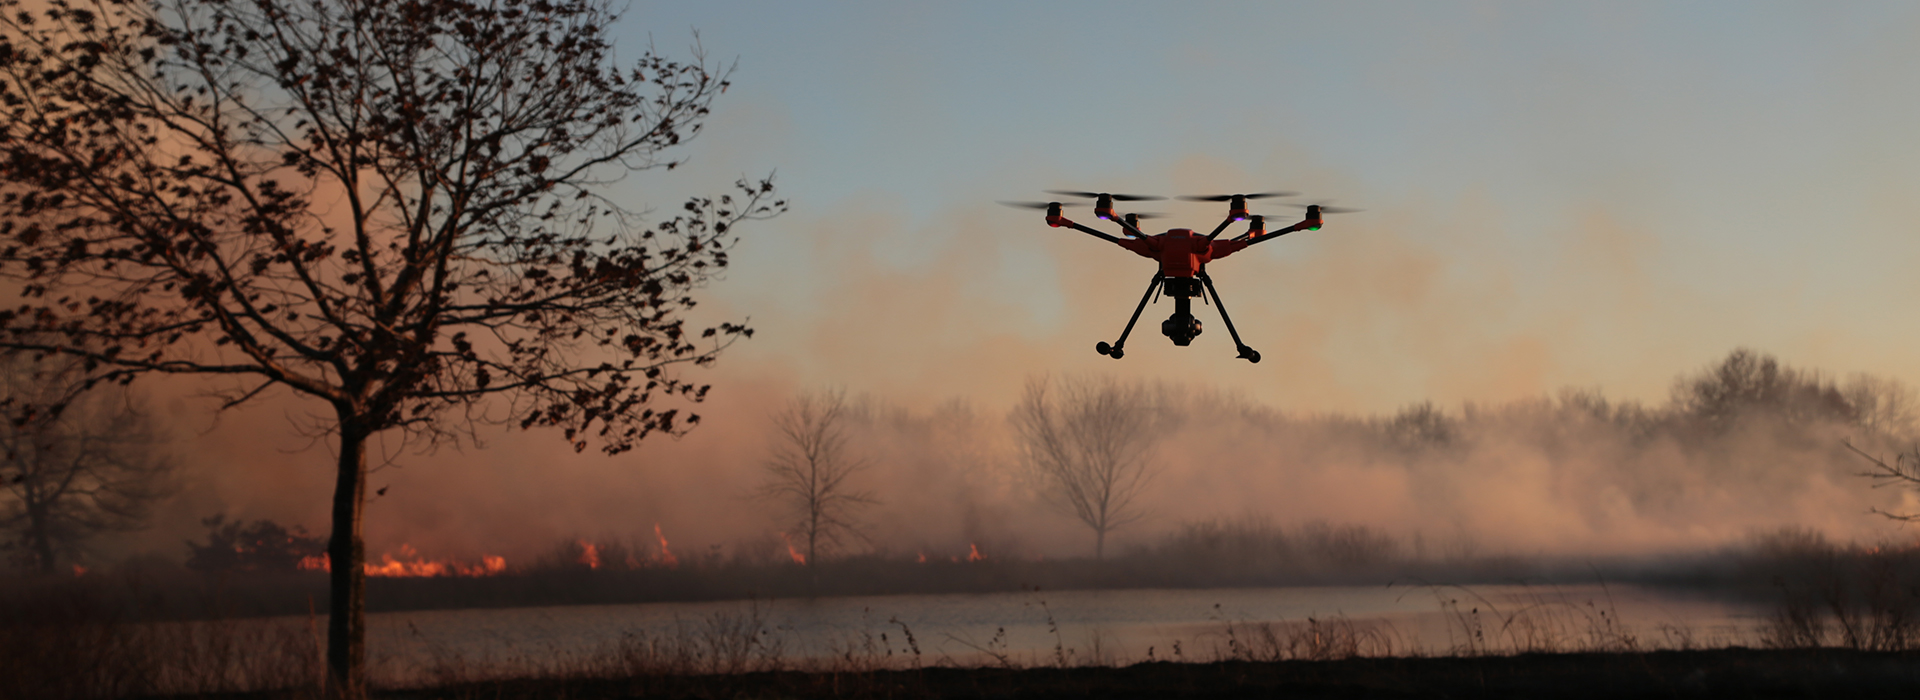 Yuneec H520 drone capturing prescribed fire at Illinois state park